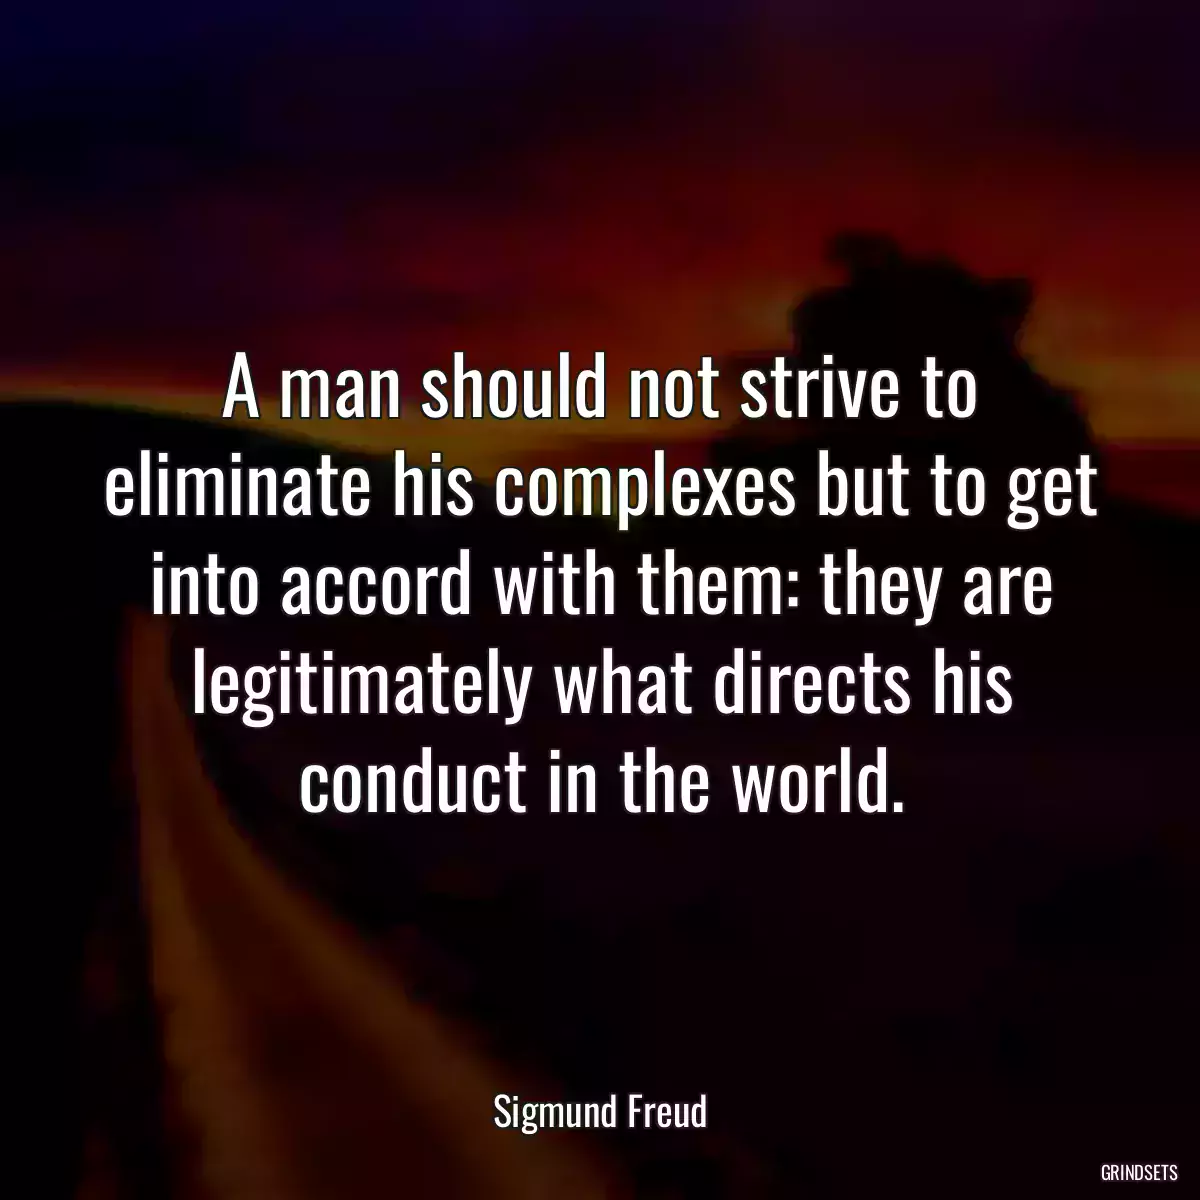 A man should not strive to eliminate his complexes but to get into accord with them: they are legitimately what directs his conduct in the world.